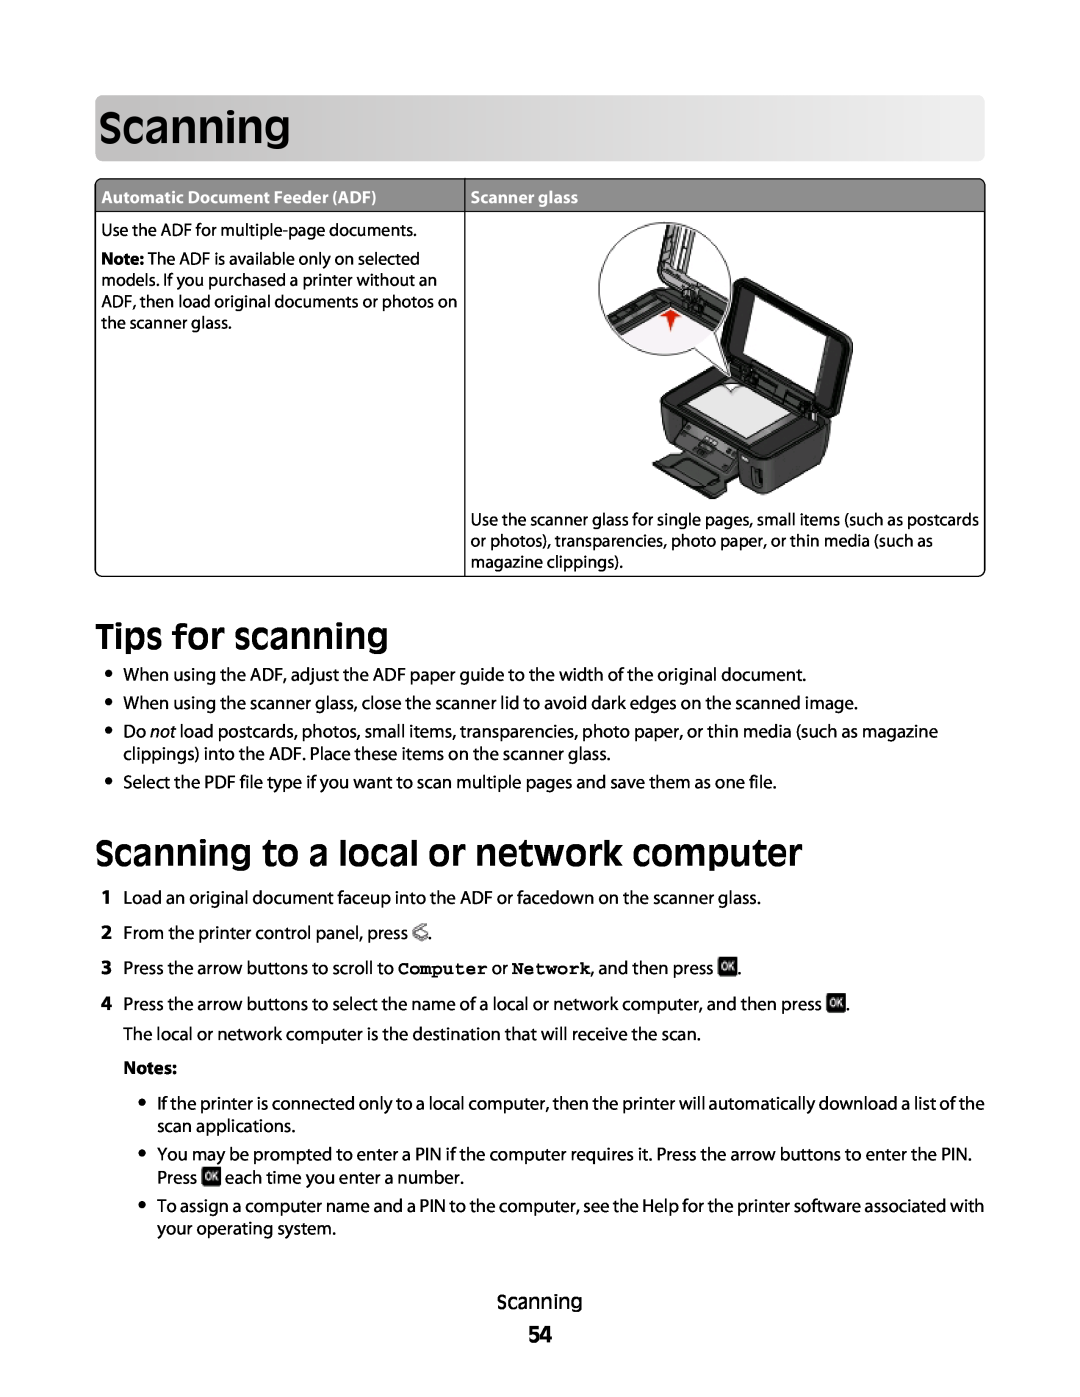 Lexmark 101, 10E manual Tips for scanning, Scanning to a local or network computer, Notes 